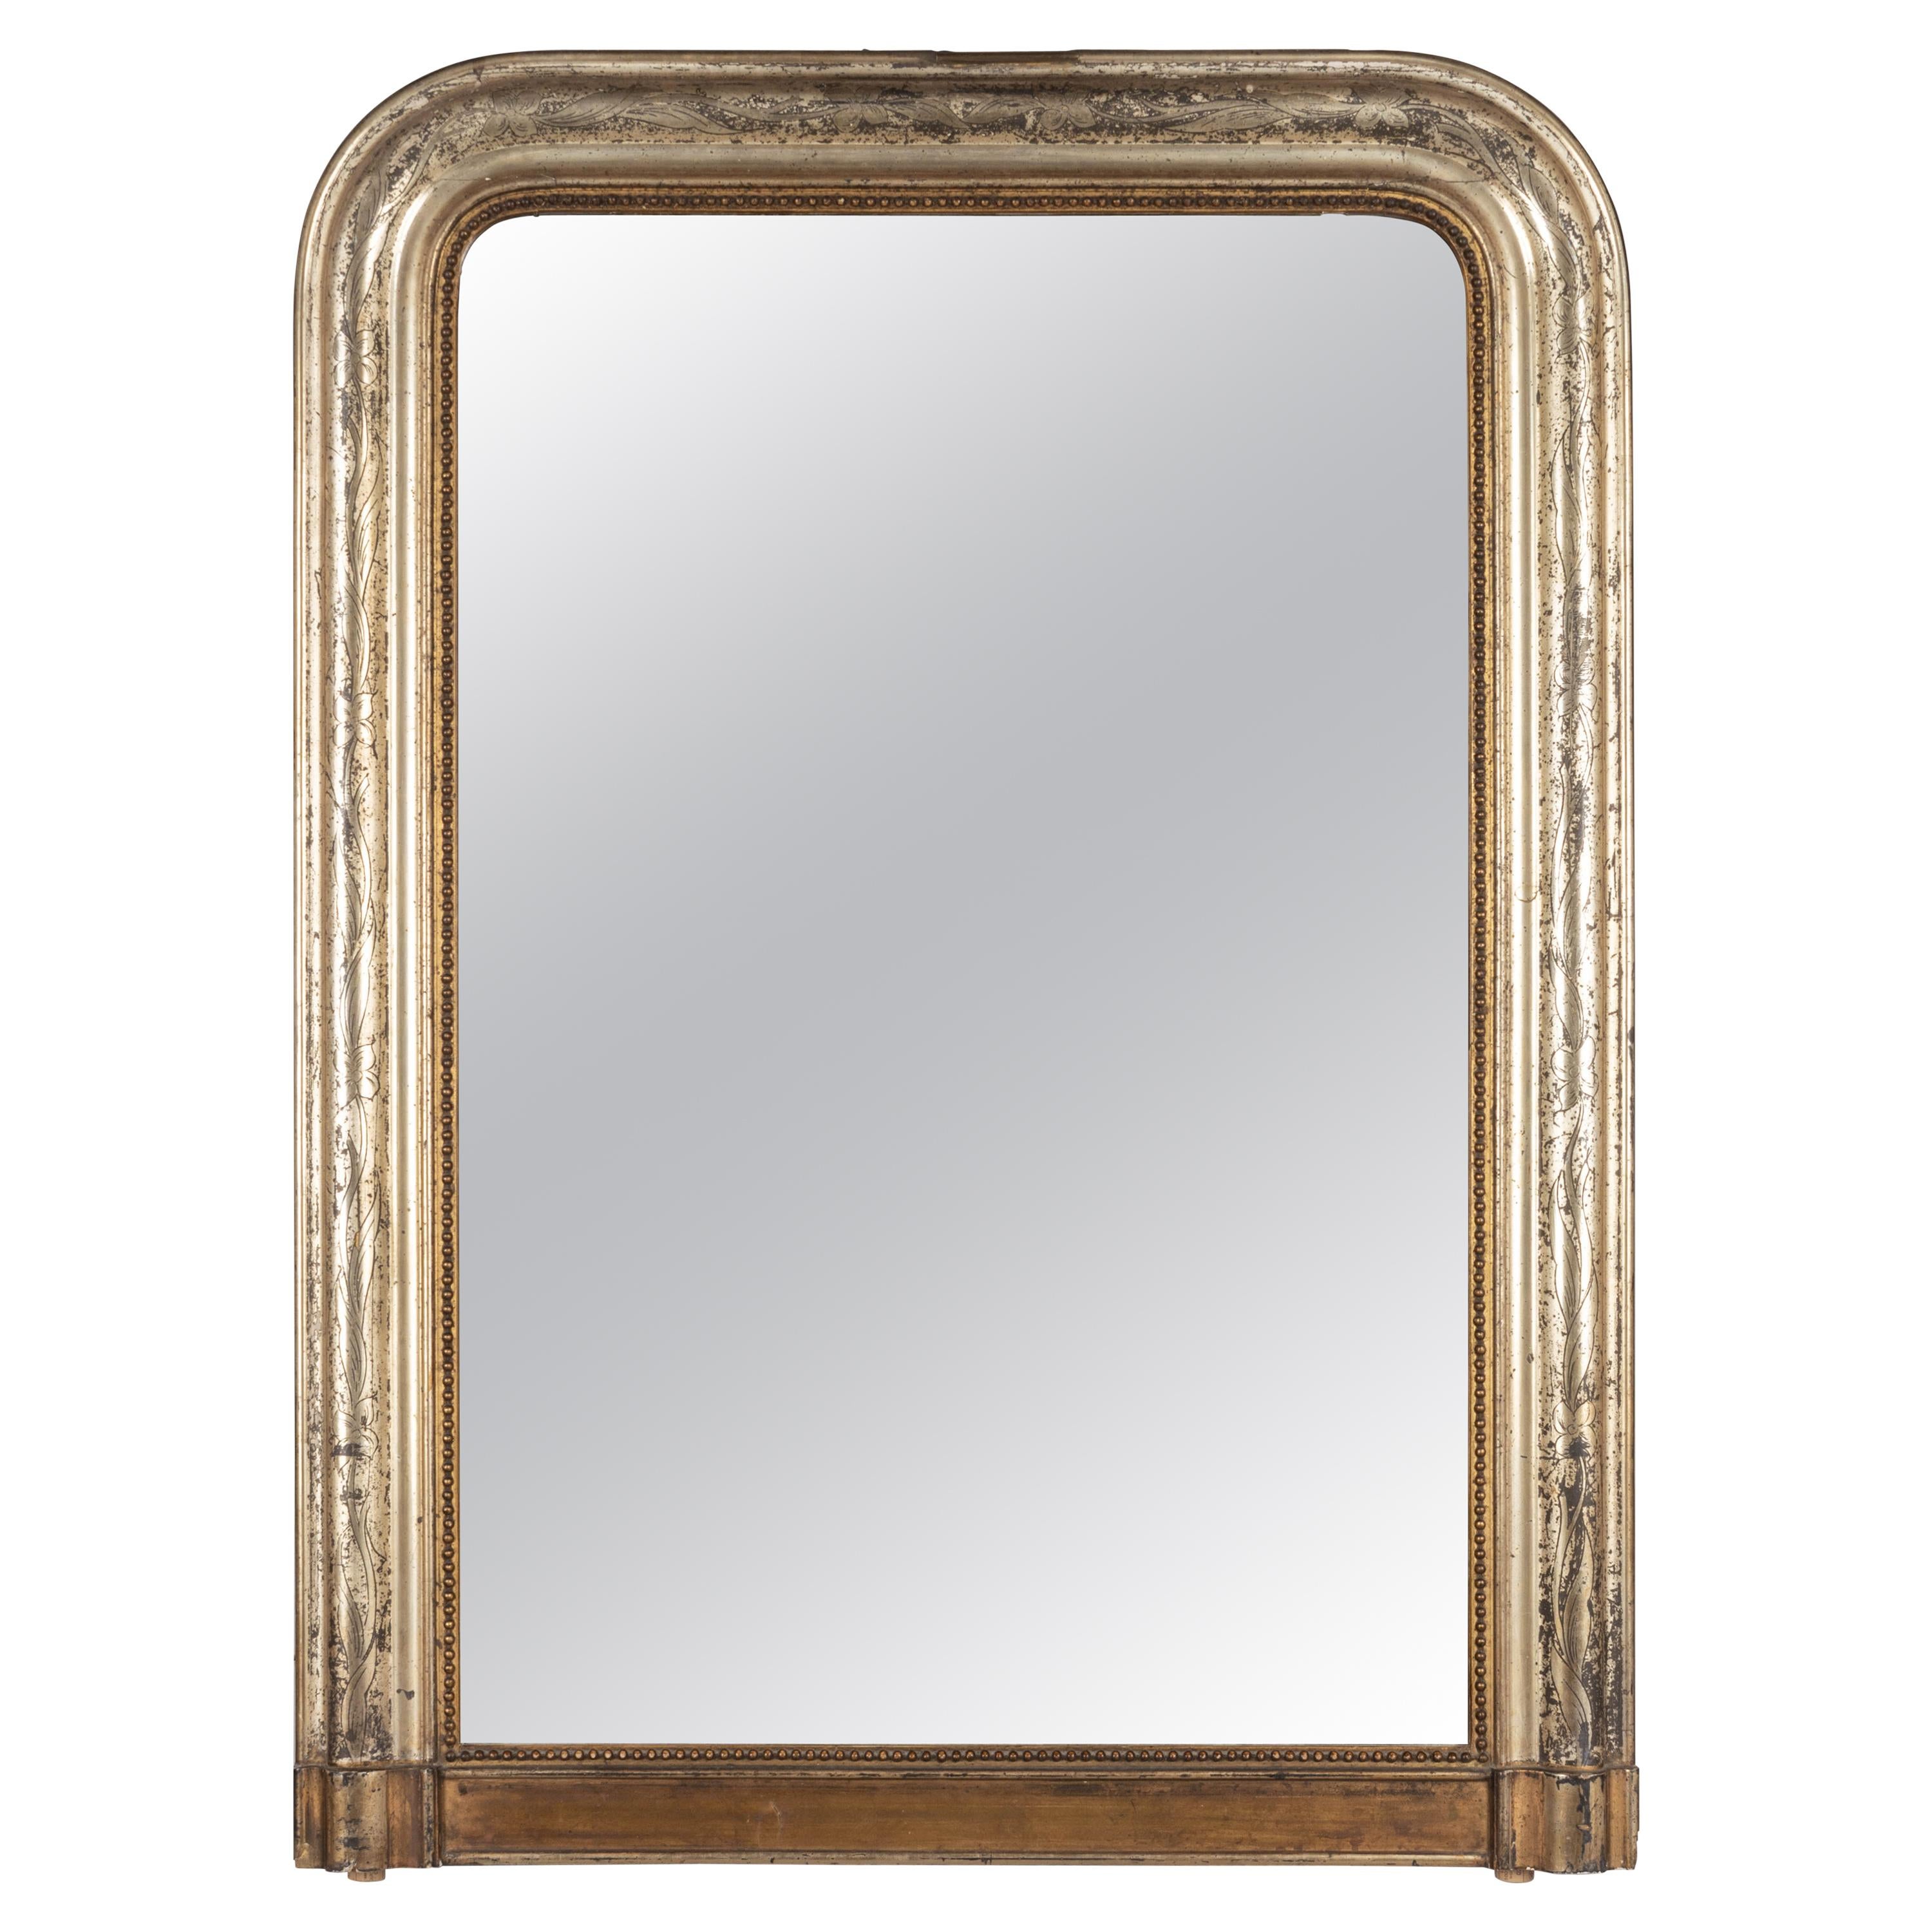 19th Century French Louis Philippe Gilded Mantel Mirror